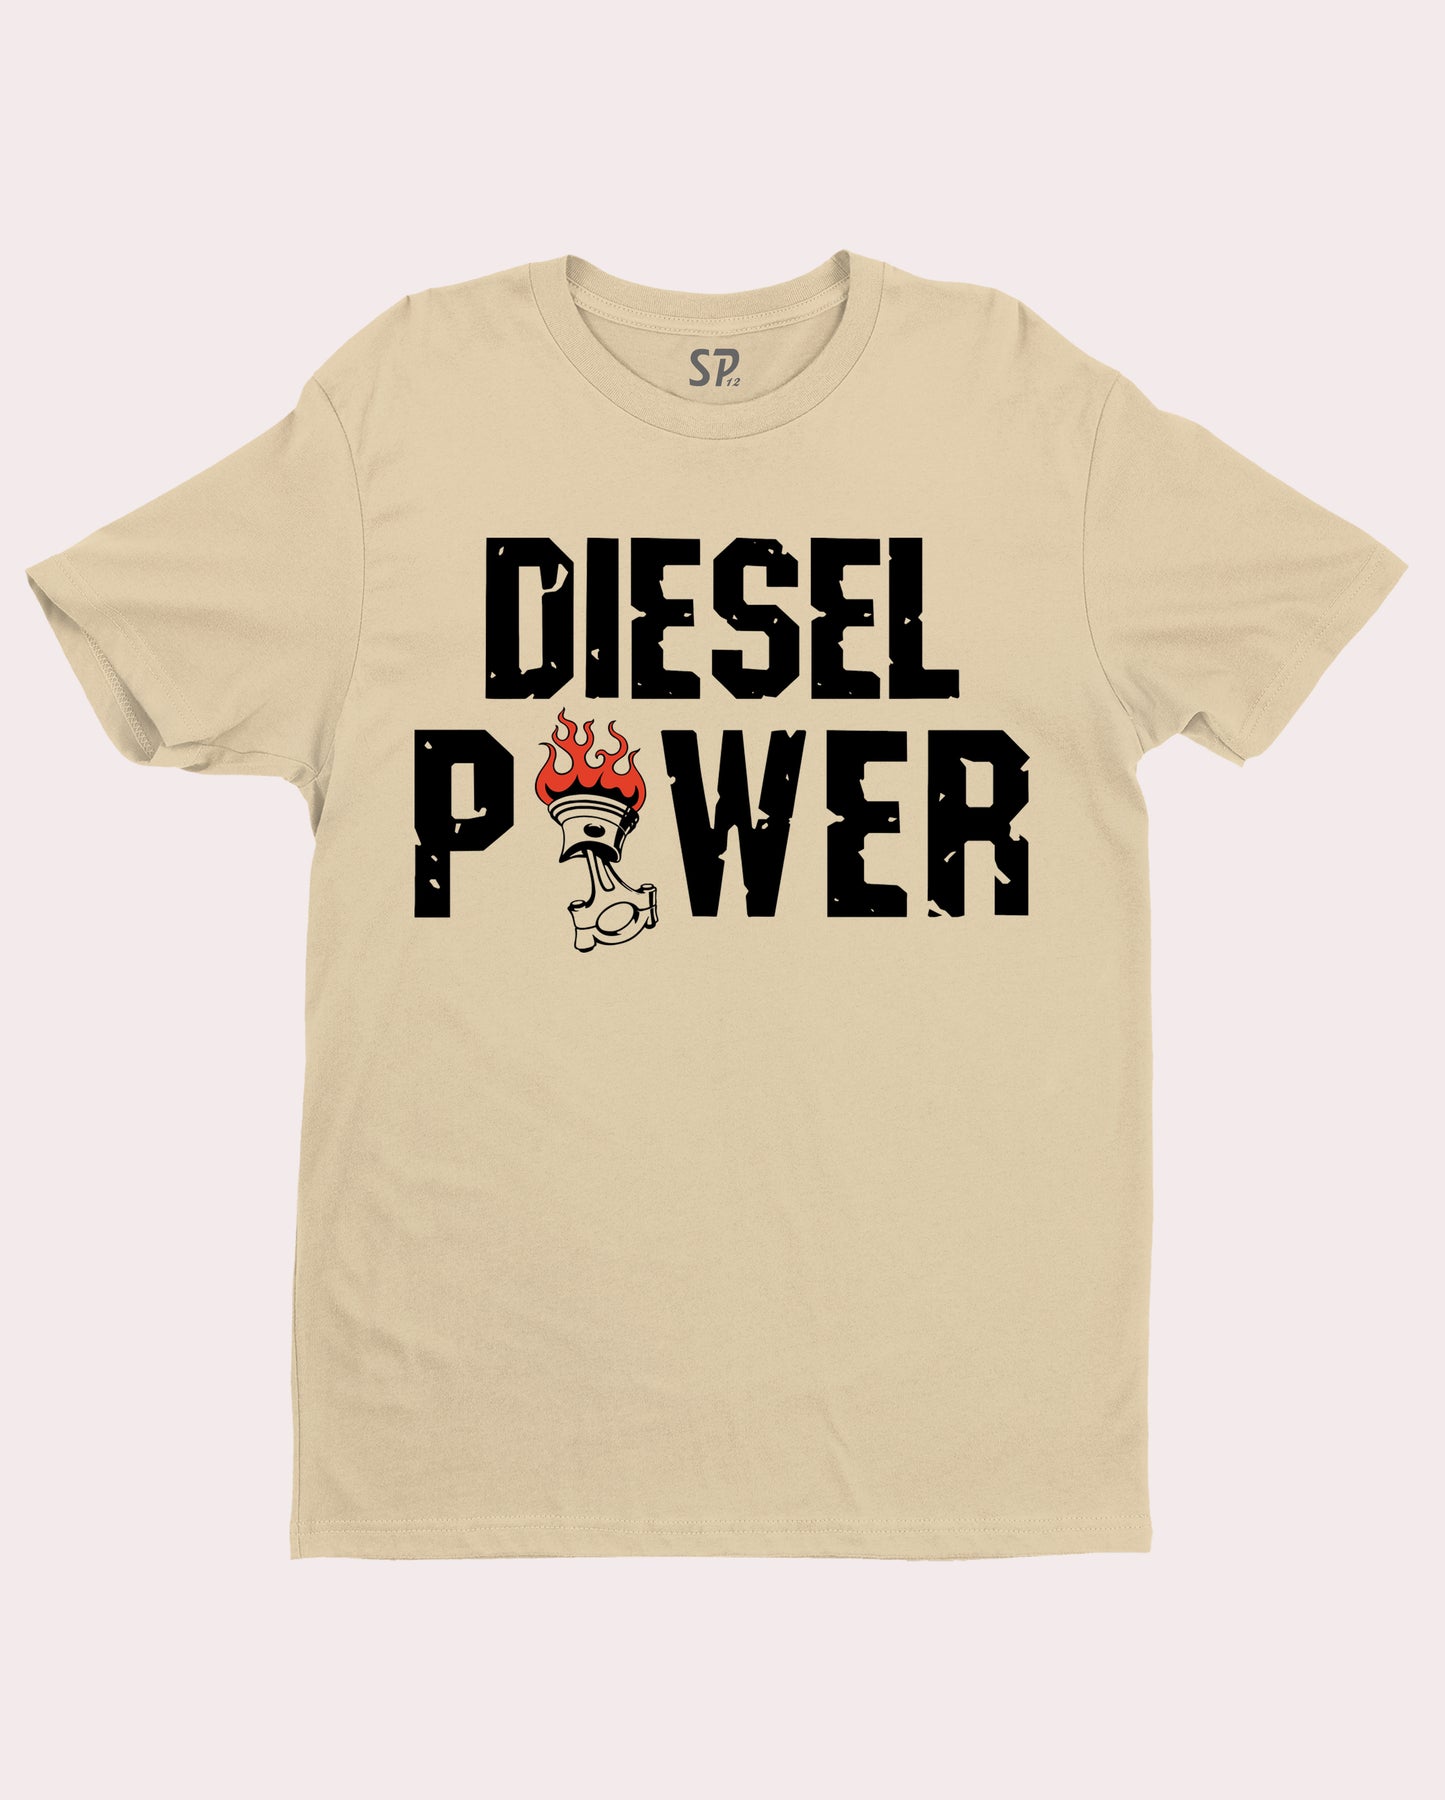 Diesel Power Fire On Automobile Hobby T shirt